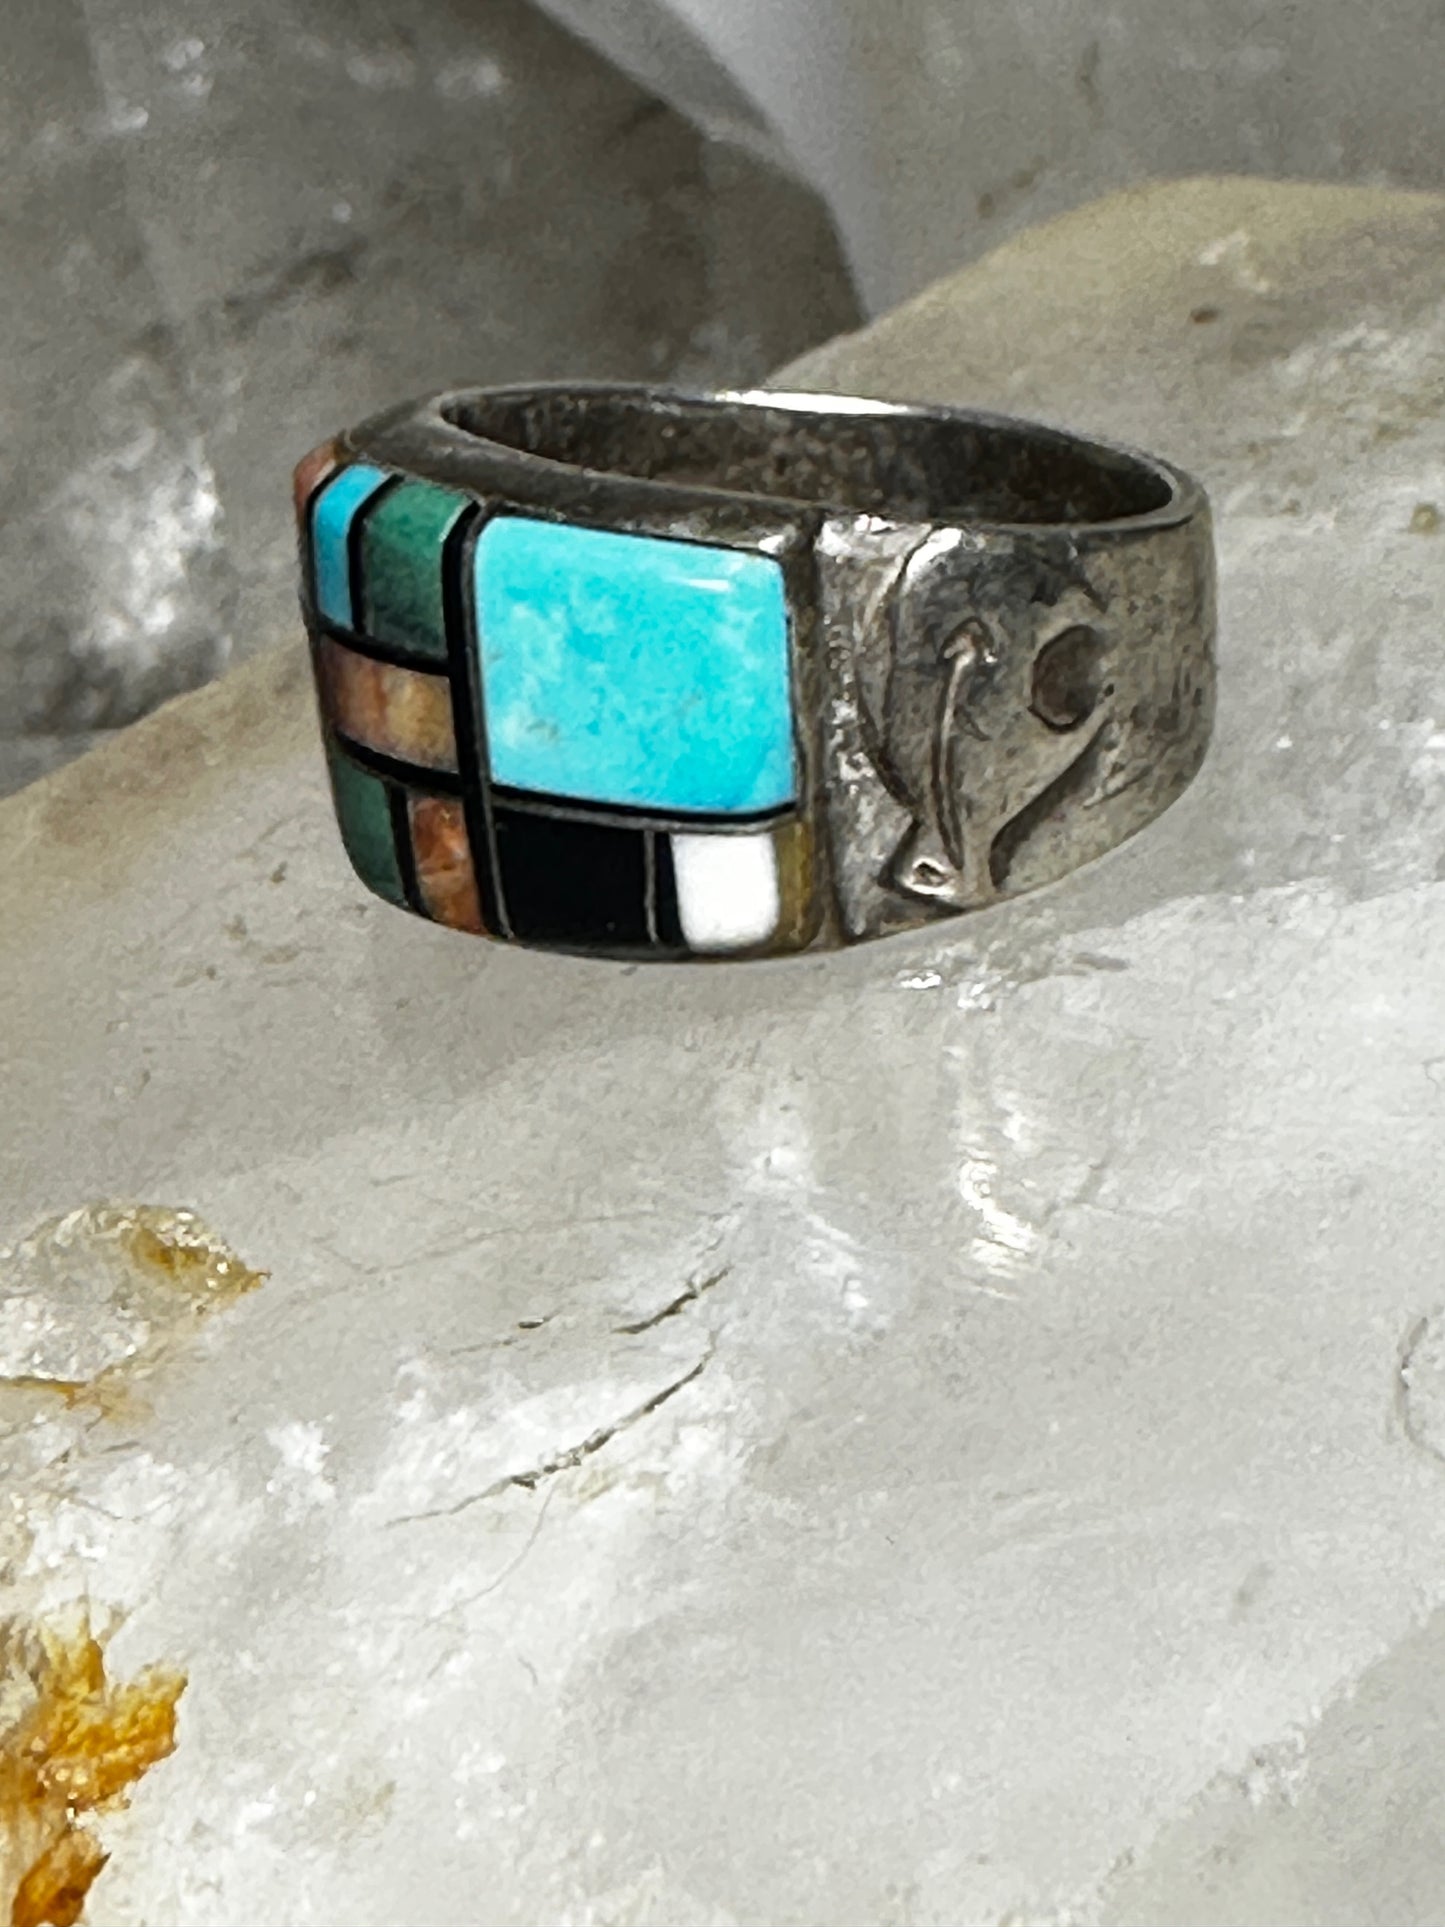 Bear ring size 7.75 turquoise band spiny oyster southwest sterling silver women men